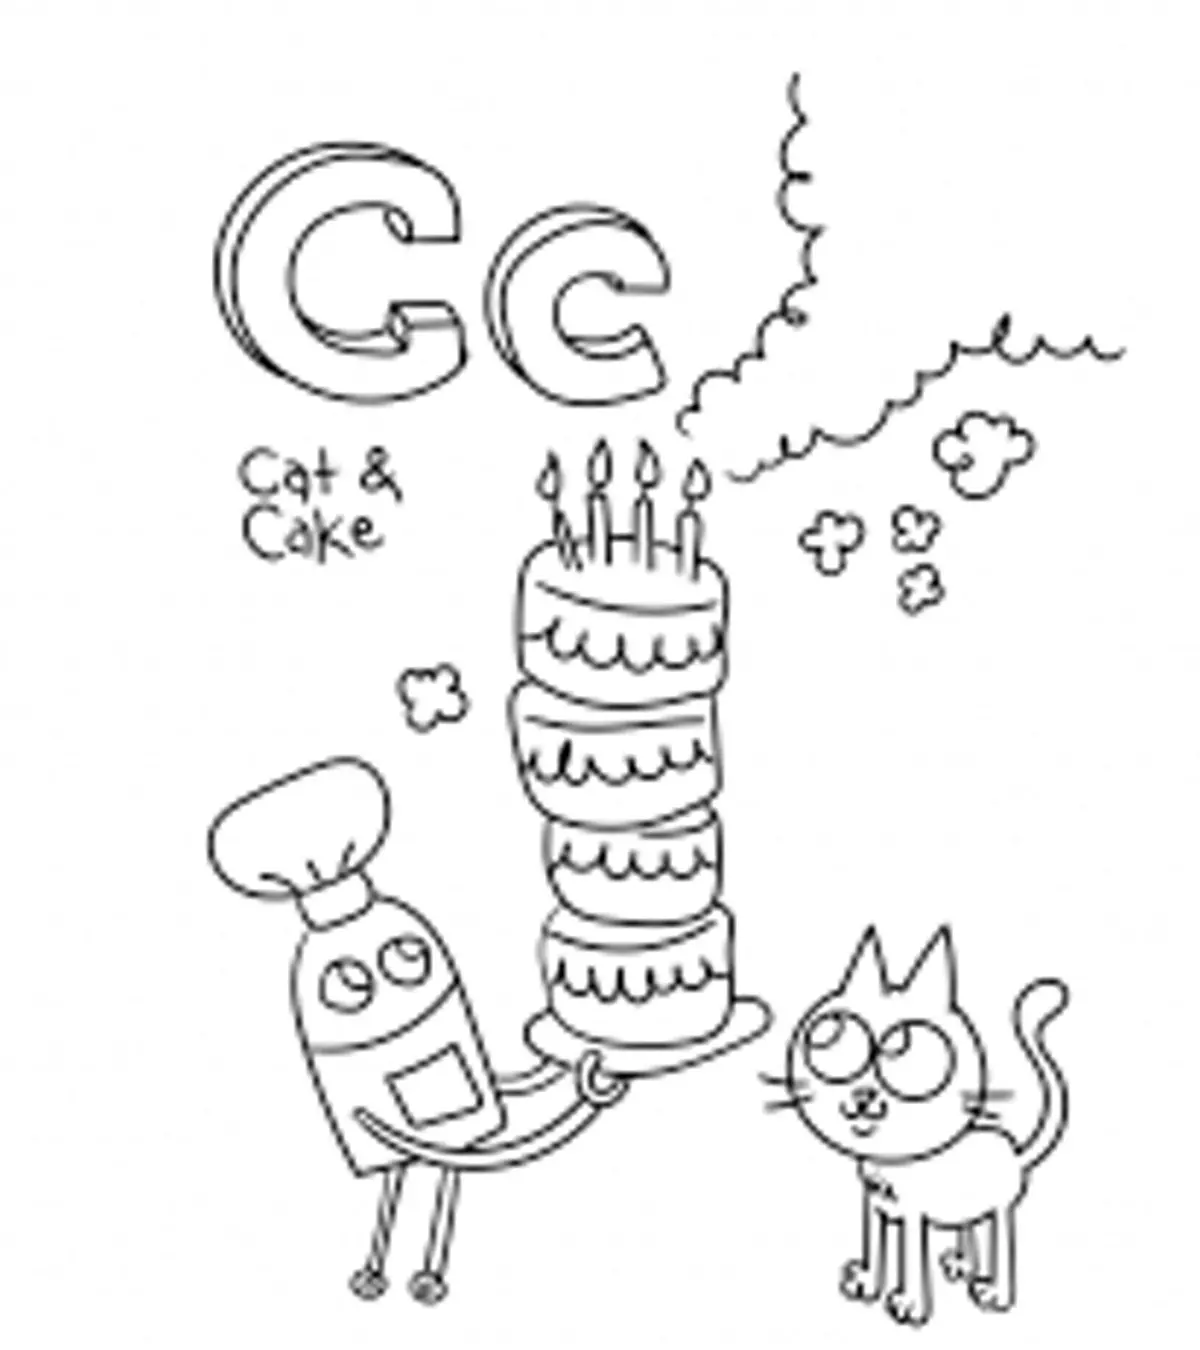 Top 10 Letter ‘C’ Coloring Pages Your Toddler Will Love To Learn & Color